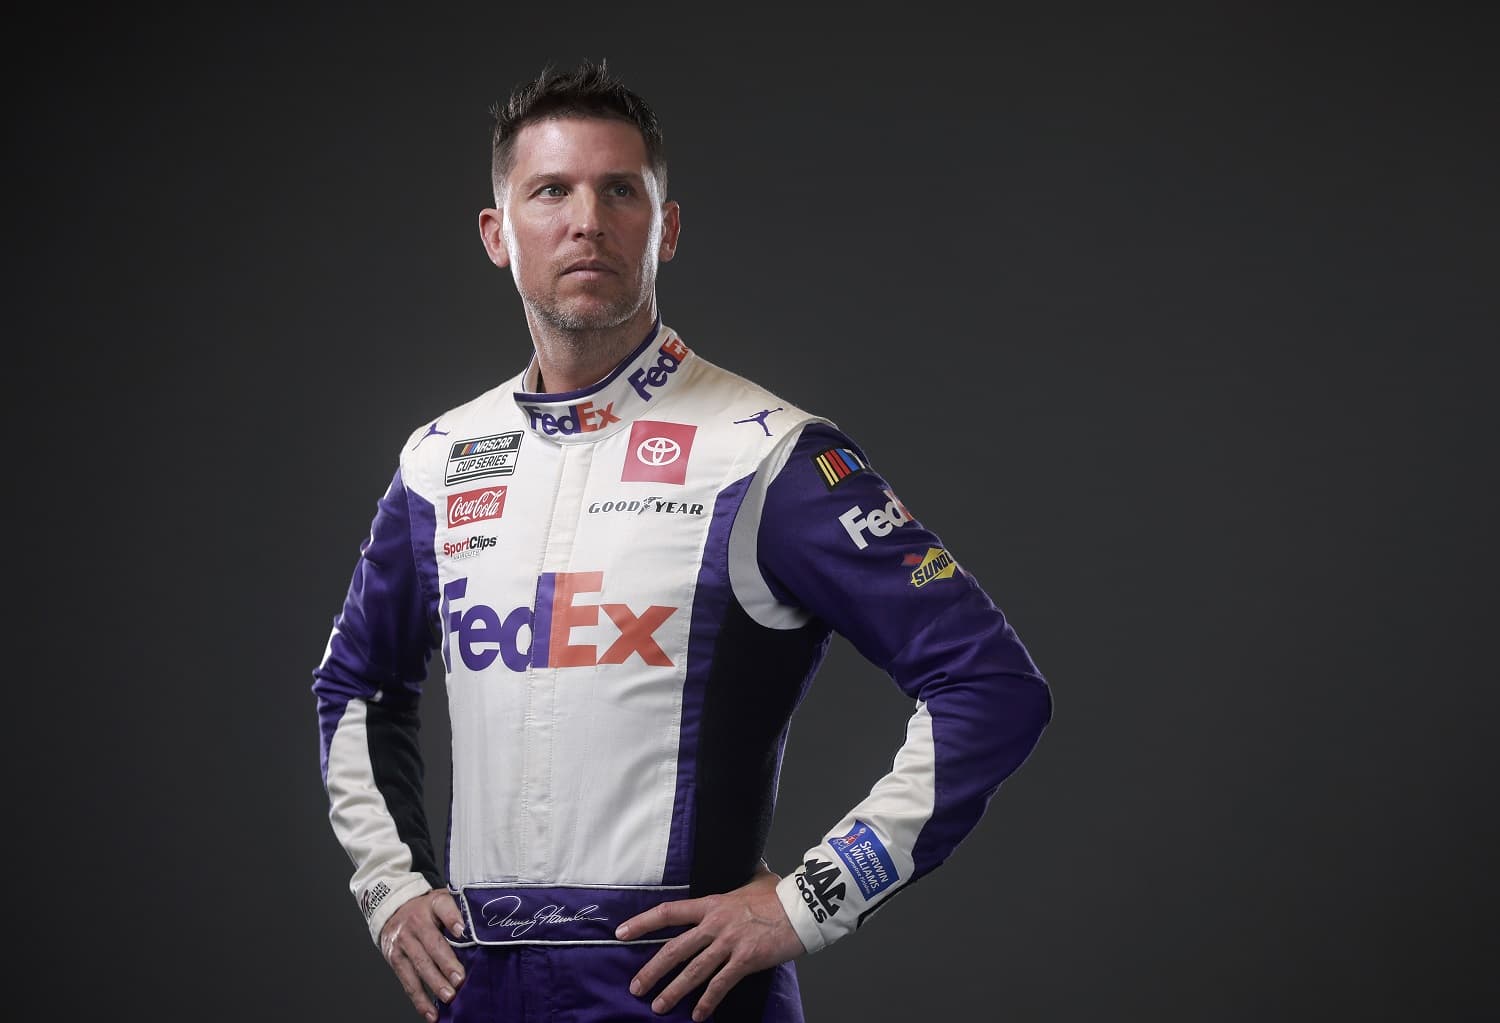 NASCAR driver Denny Hamlin poses for a photo during NASCAR Production Days at Charlotte Convention Center on Jan. 18, 2023.